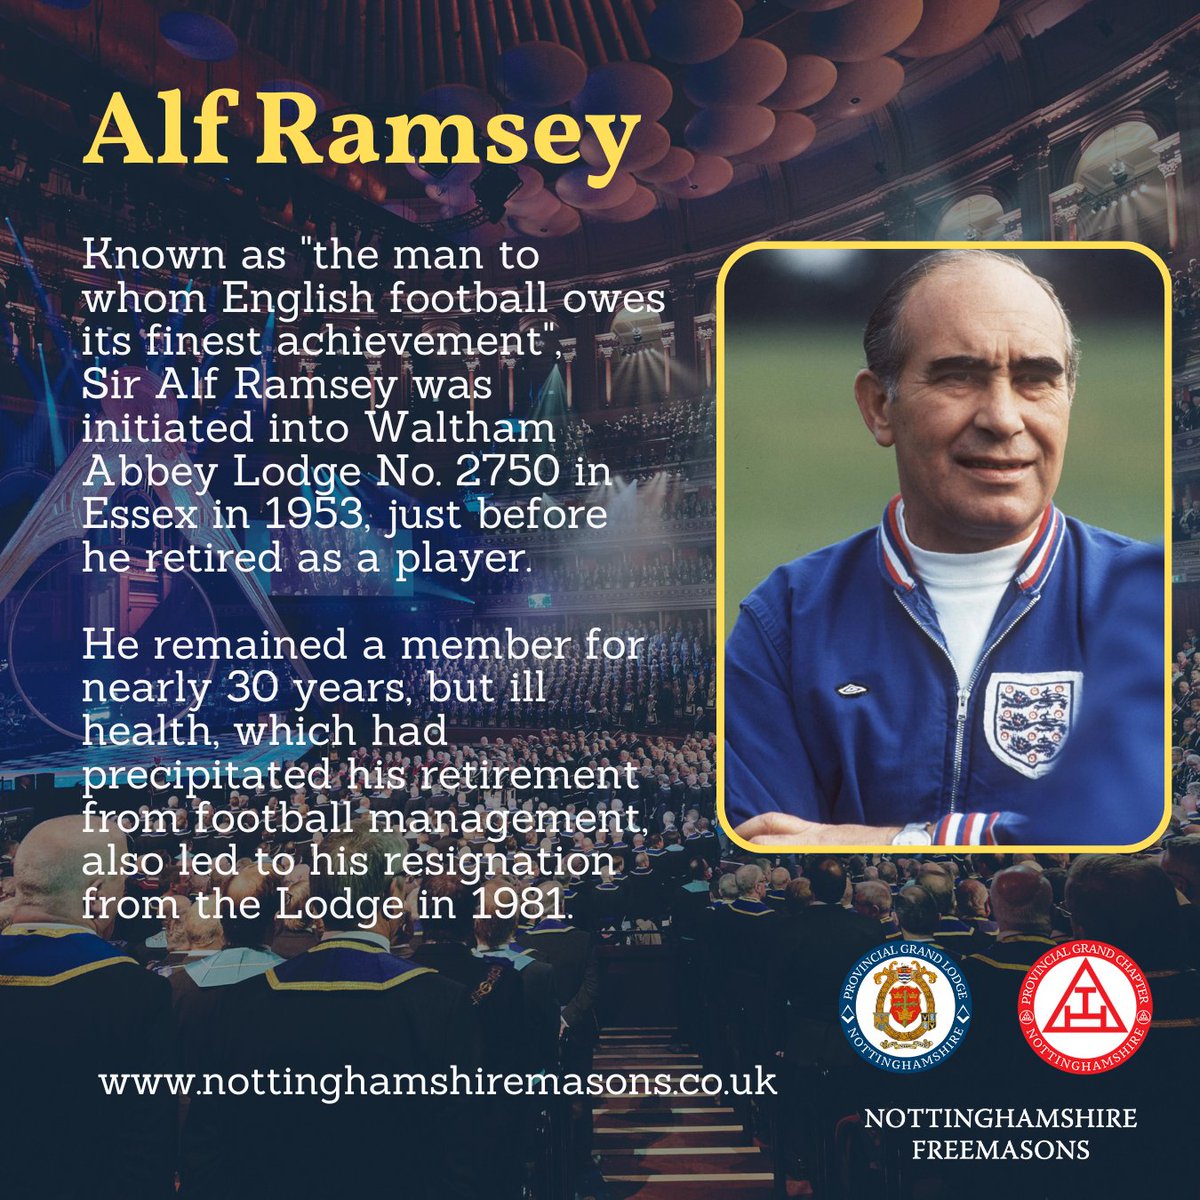 Sir Alf Ramsey led England to victory in the famous 1966 World Cup and was initiated into Waltham Abbey Lodge No. 2750 in Essex in 1953, just before he retired as a player. Learn More and Join Us nottinghamshiremasons.co.uk #Freemasons